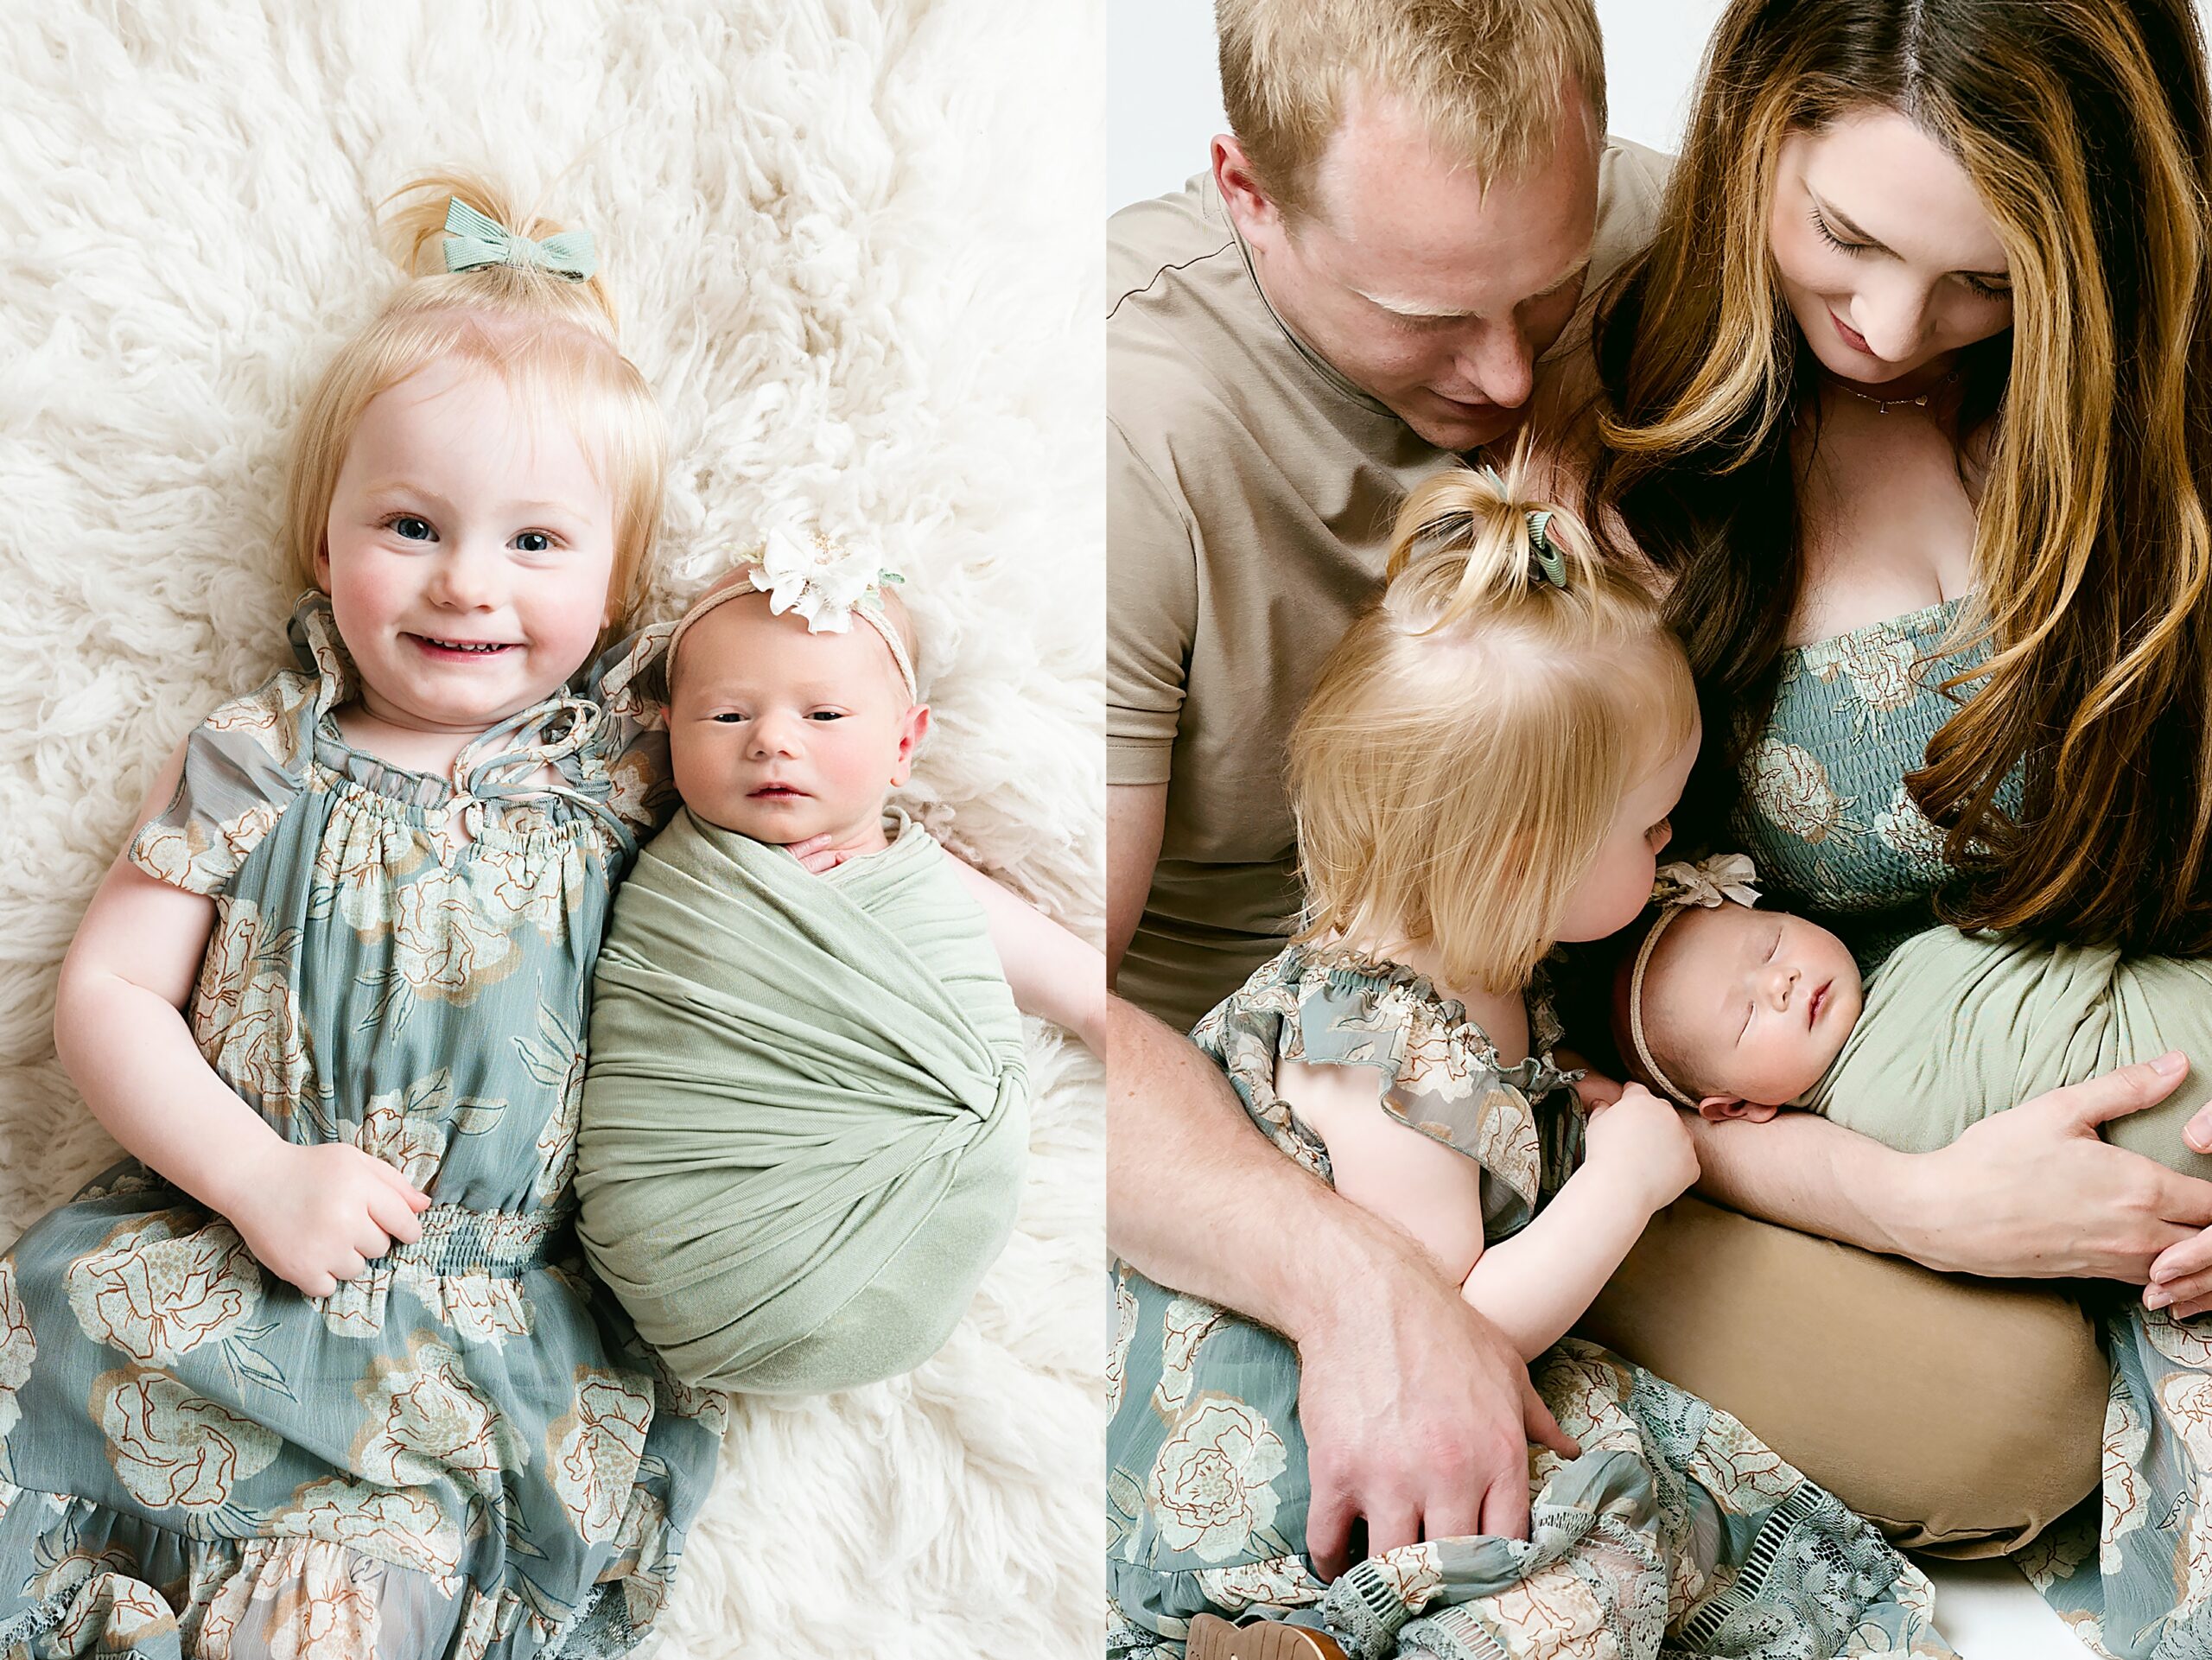 Left Image: A happy young girl with light blonde hair, wearing a green dress with floral patterns, lies on a soft, fluffy white rug. She is smiling brightly while holding a newborn baby wrapped in a light green swaddle. The baby, adorned with a white floral headband, looks serene and content. Right Image: A tender family moment captured with a mother, father, and their two children. The mother, with long brown hair, and the father, with short blonde hair, are sitting close together. The young girl from the left image leans in to look at her newborn sibling, who is peacefully sleeping in the mother's arms. The family is dressed in coordinated earth-toned outfits, enhancing the warmth of the scene.